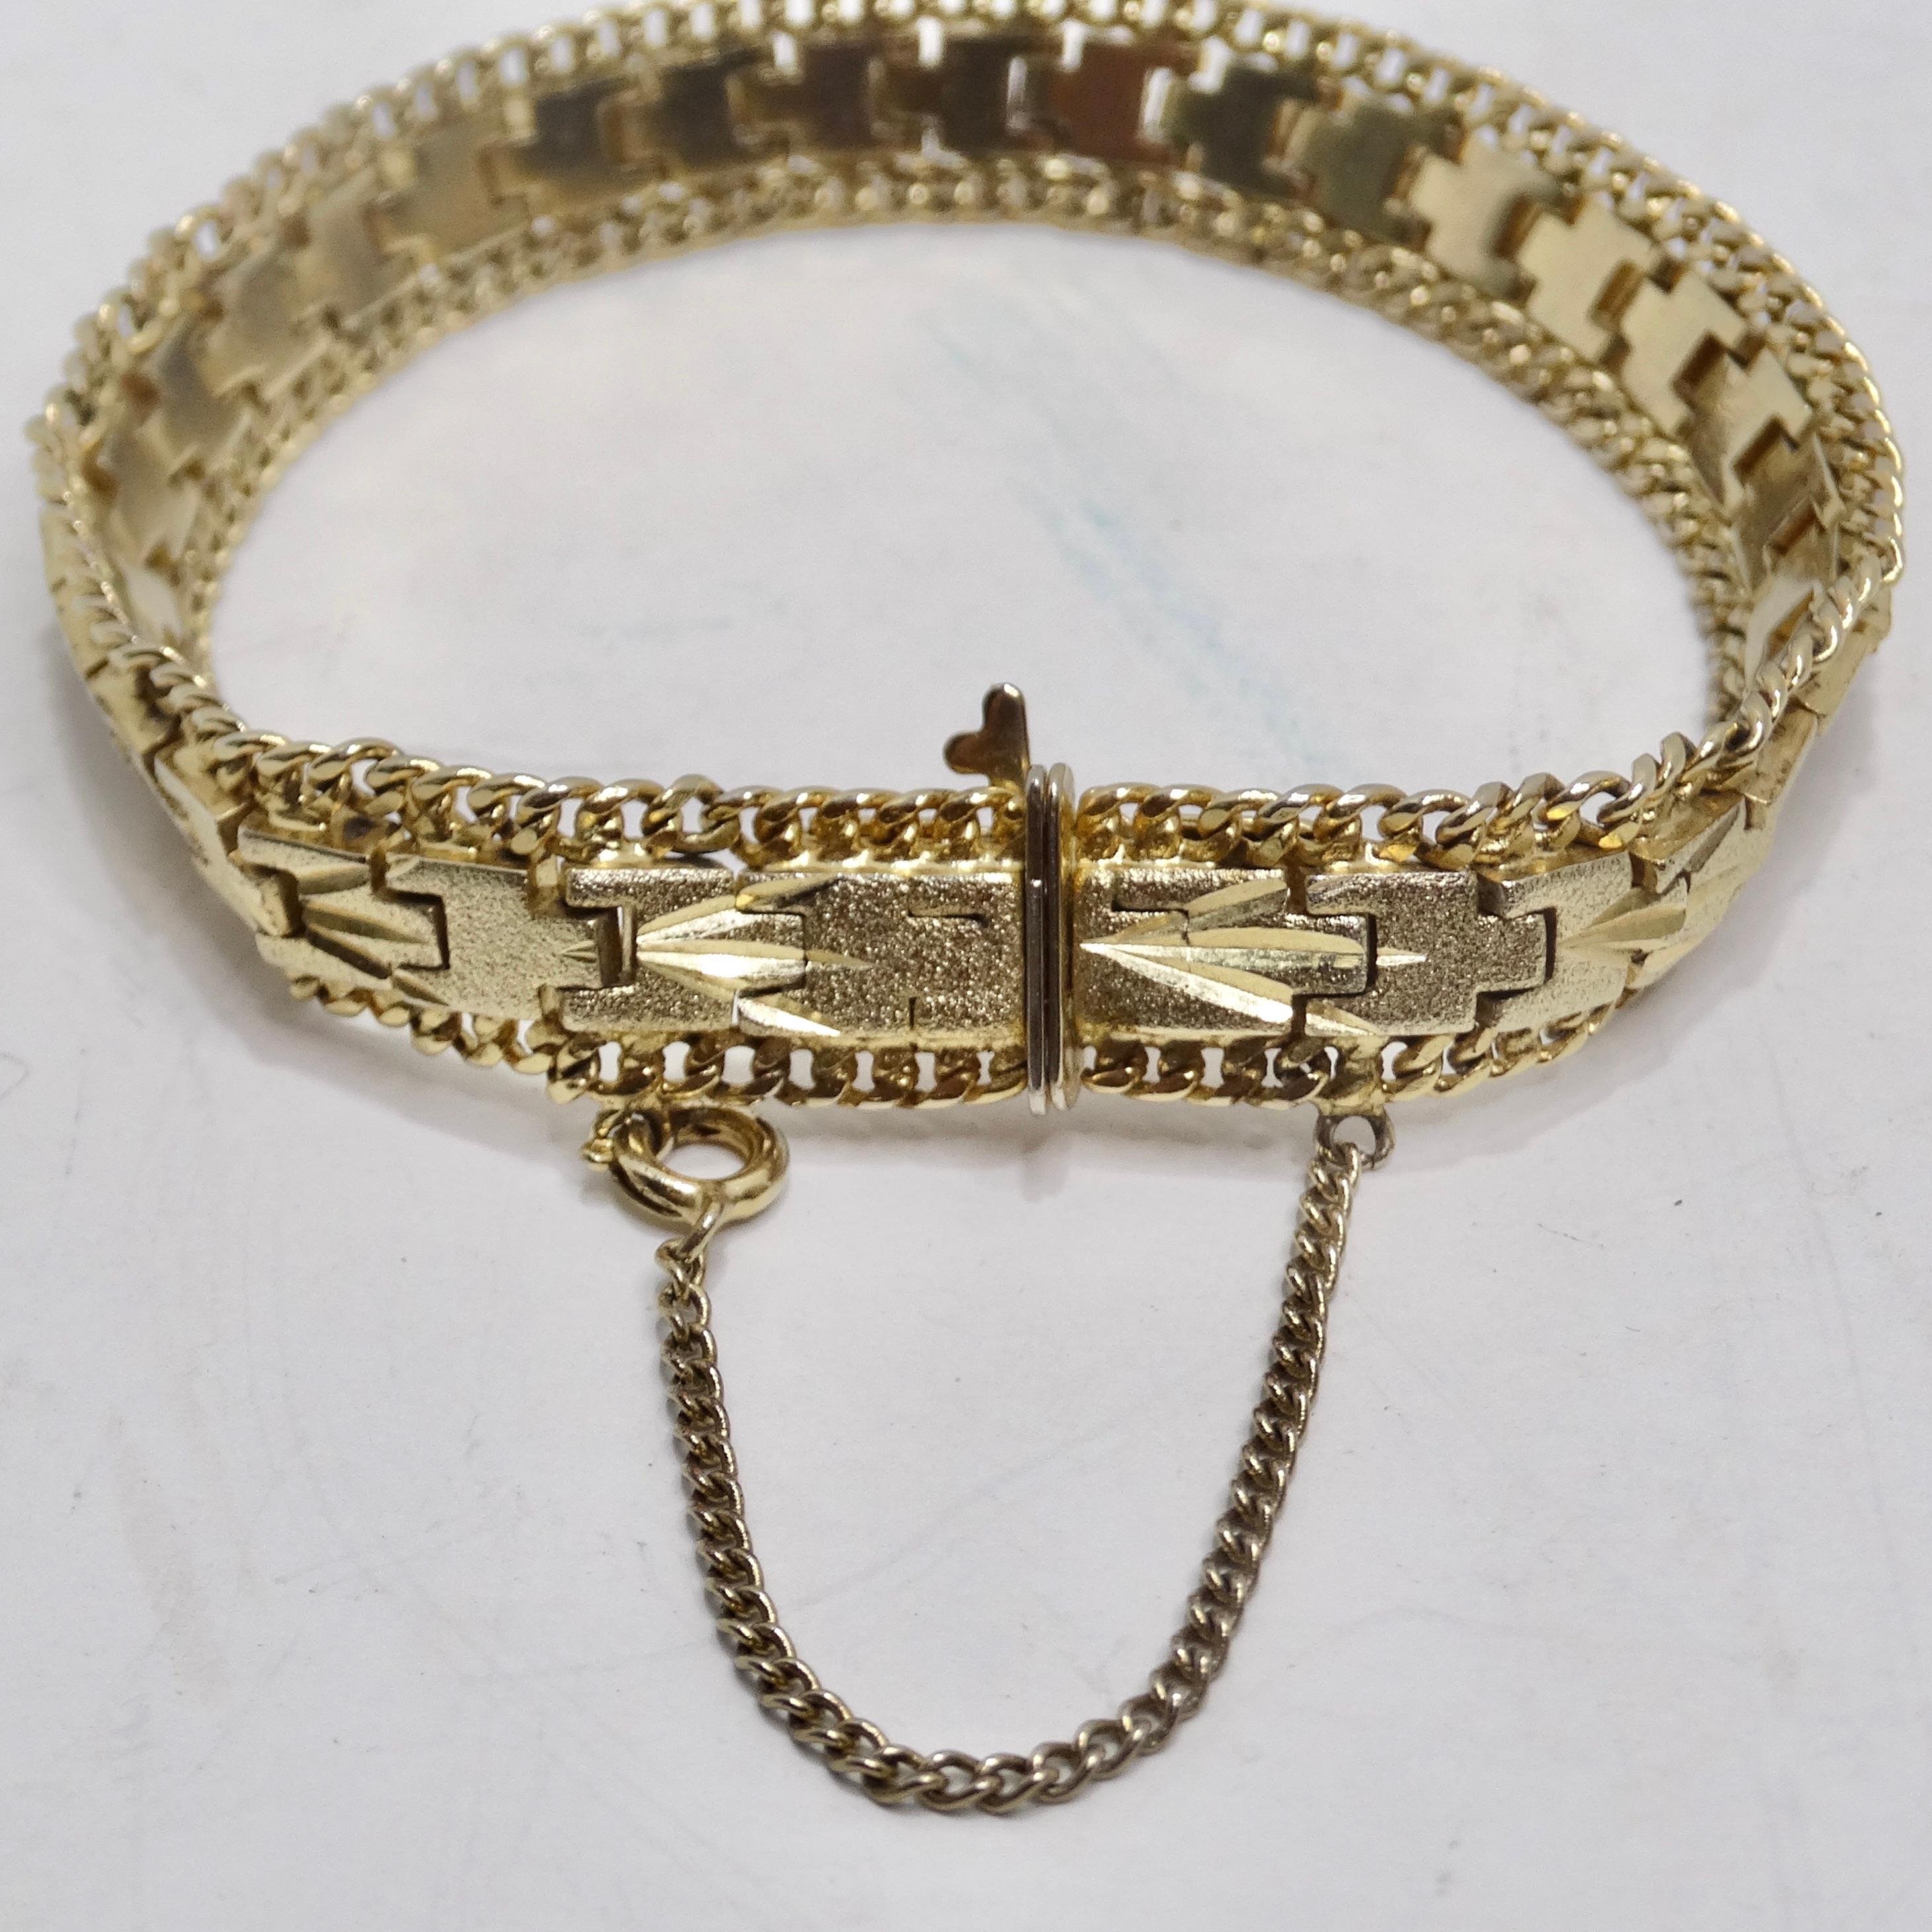 24K Gold Plated 1960s Chain Bracelet In Excellent Condition For Sale In Scottsdale, AZ